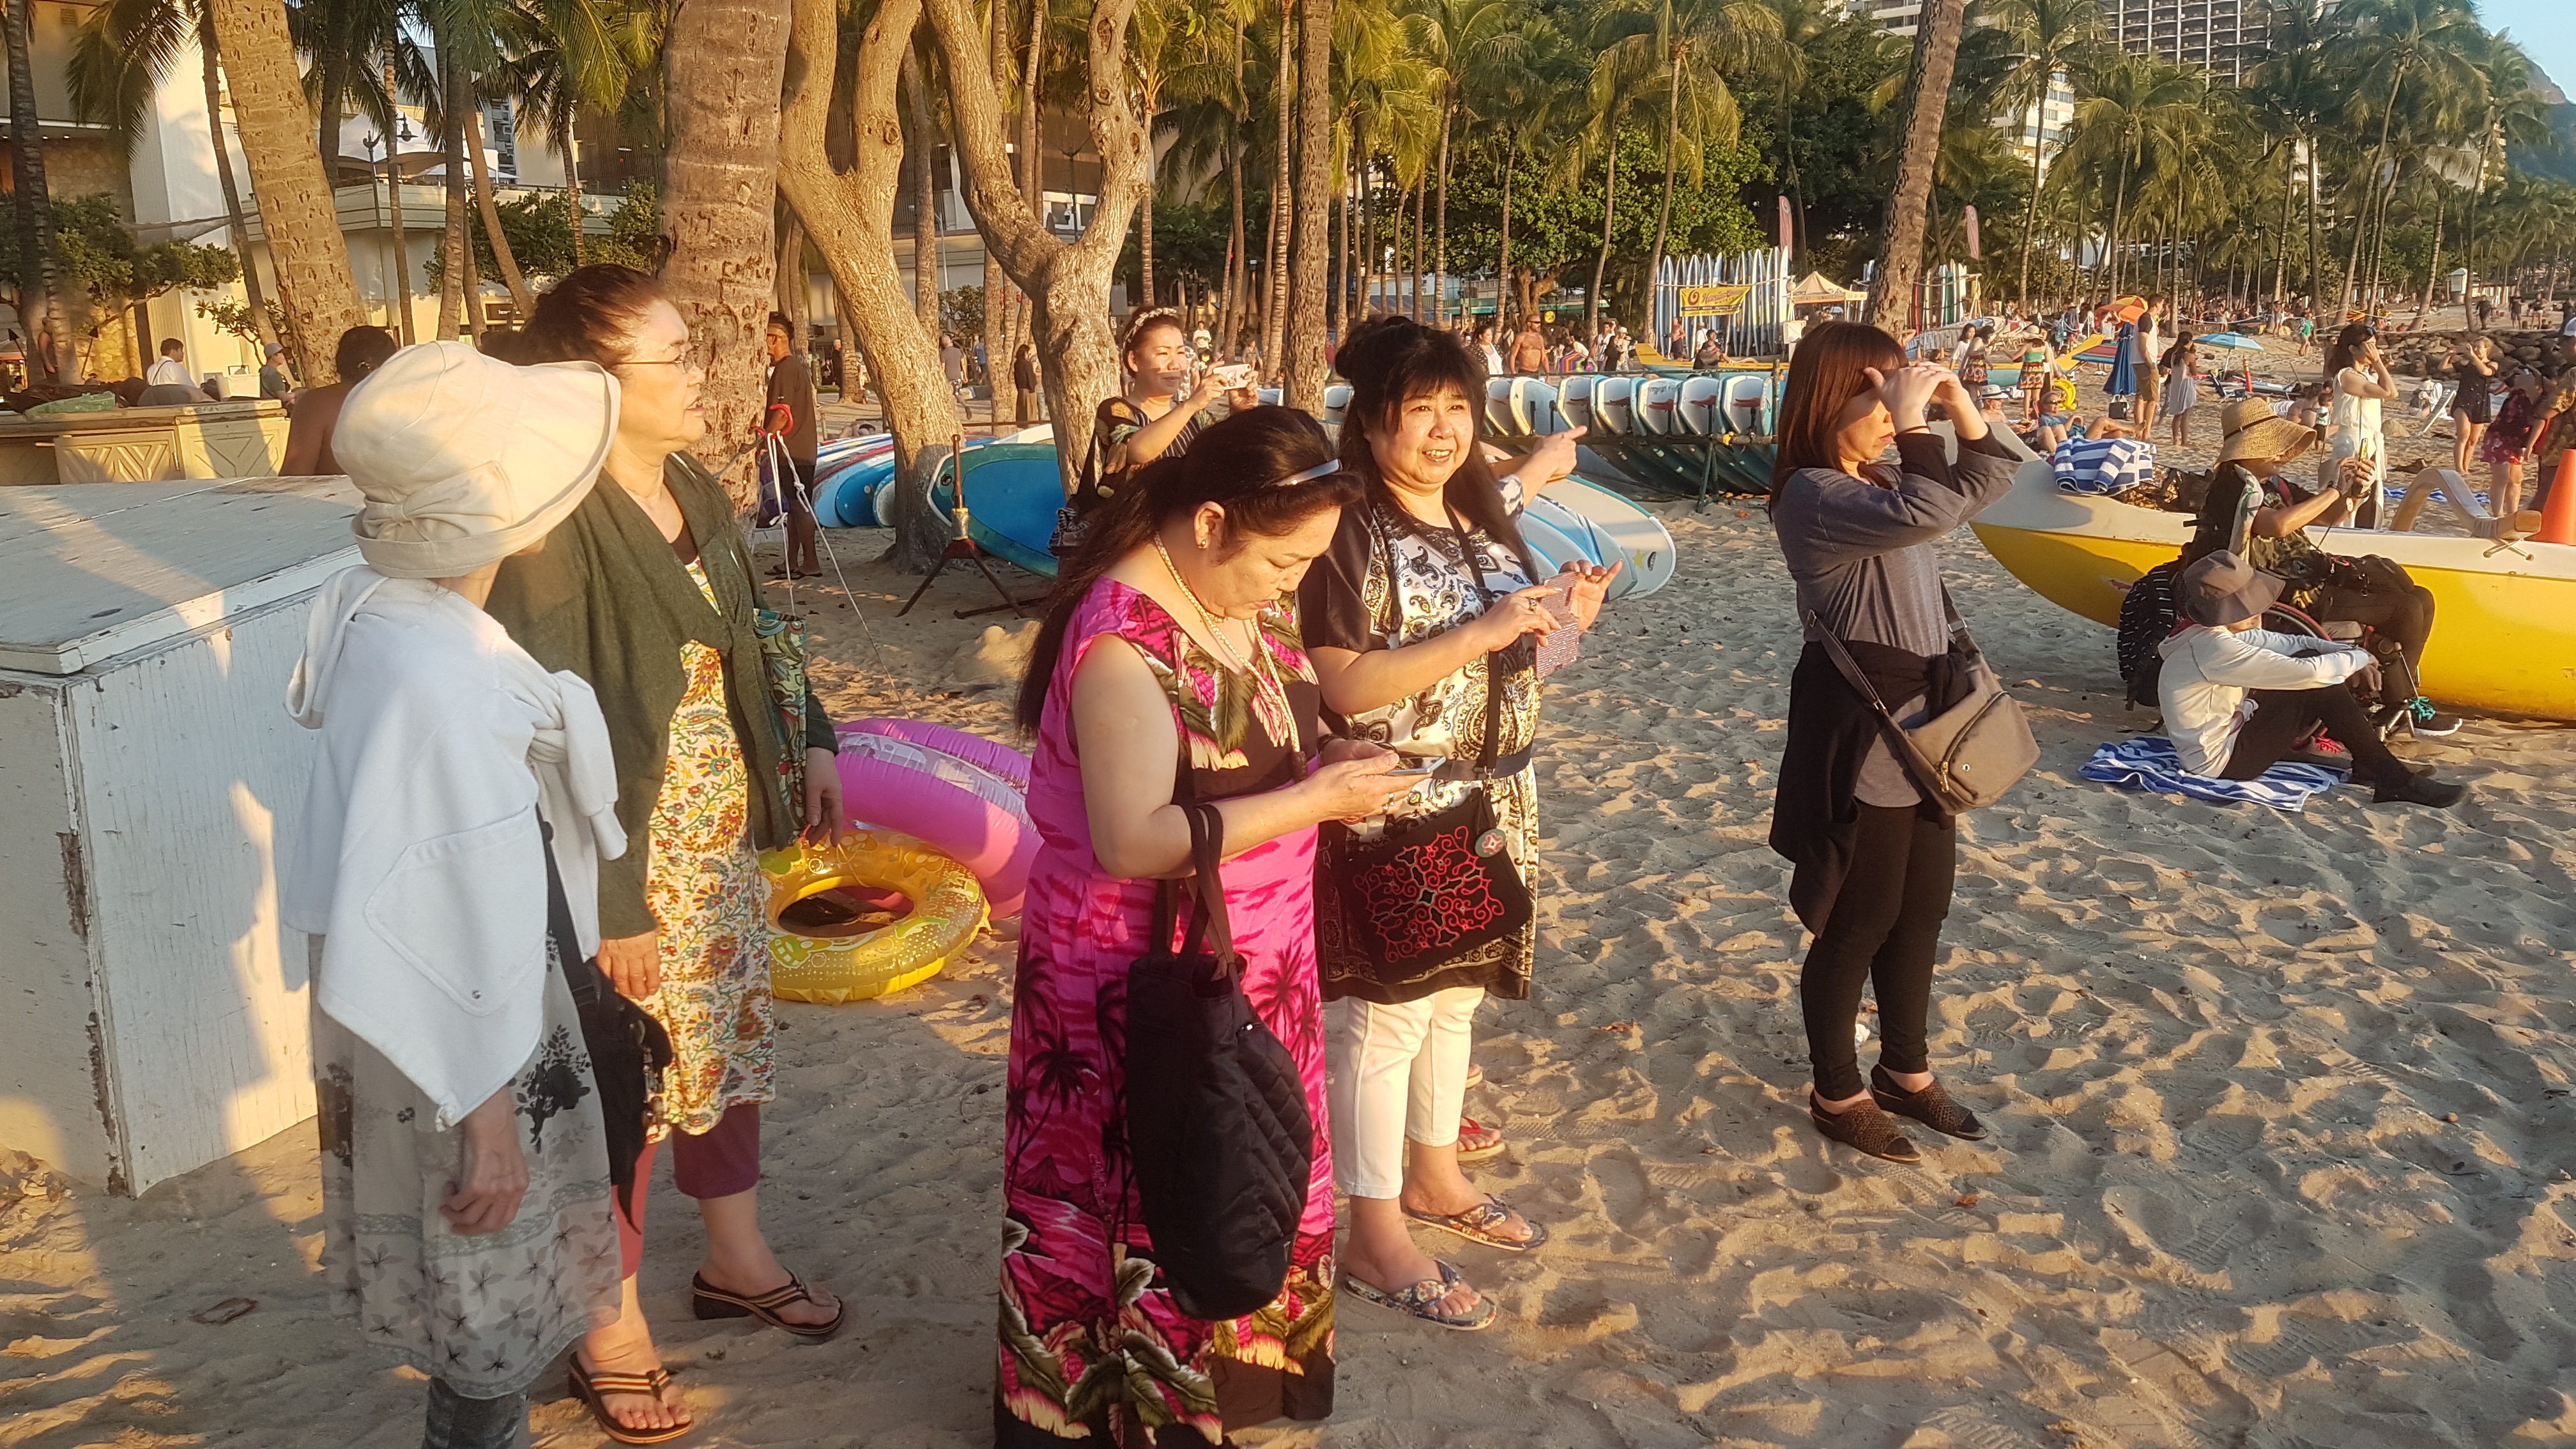 Six women dressed in summer wear on a beach with trees, surfboards and other tourists in the background. Some are gazing at the sea while some are in various stages of taking photographs with their mobile phones. The setting sun lights up their faces.